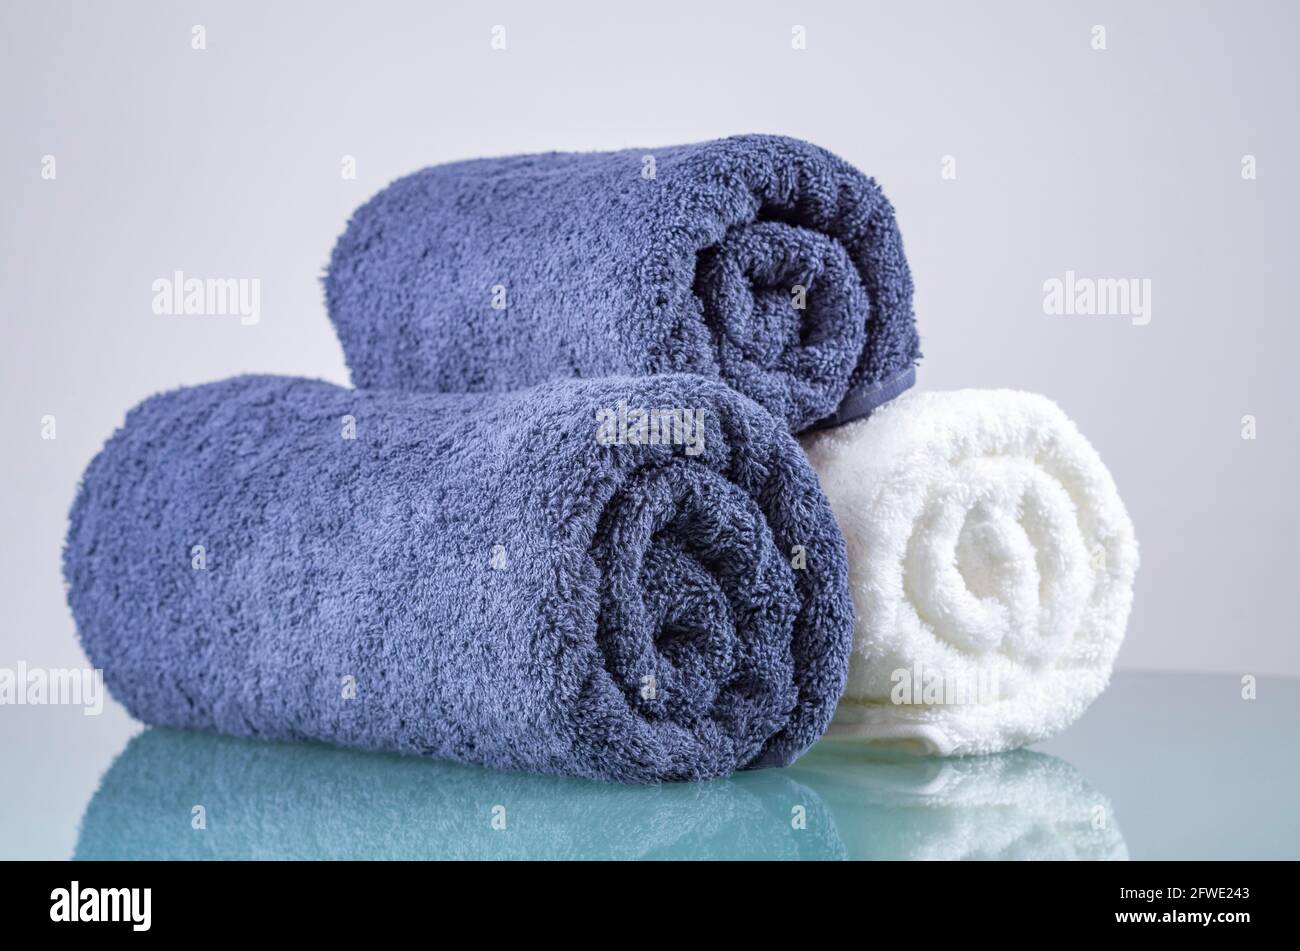 https://c8.alamy.com/comp/2FWE243/towels-close-up-of-rolled-white-and-blue-fluffy-towels-beauty-and-massage-spa-concept-luxury-hotel-2FWE243.jpg